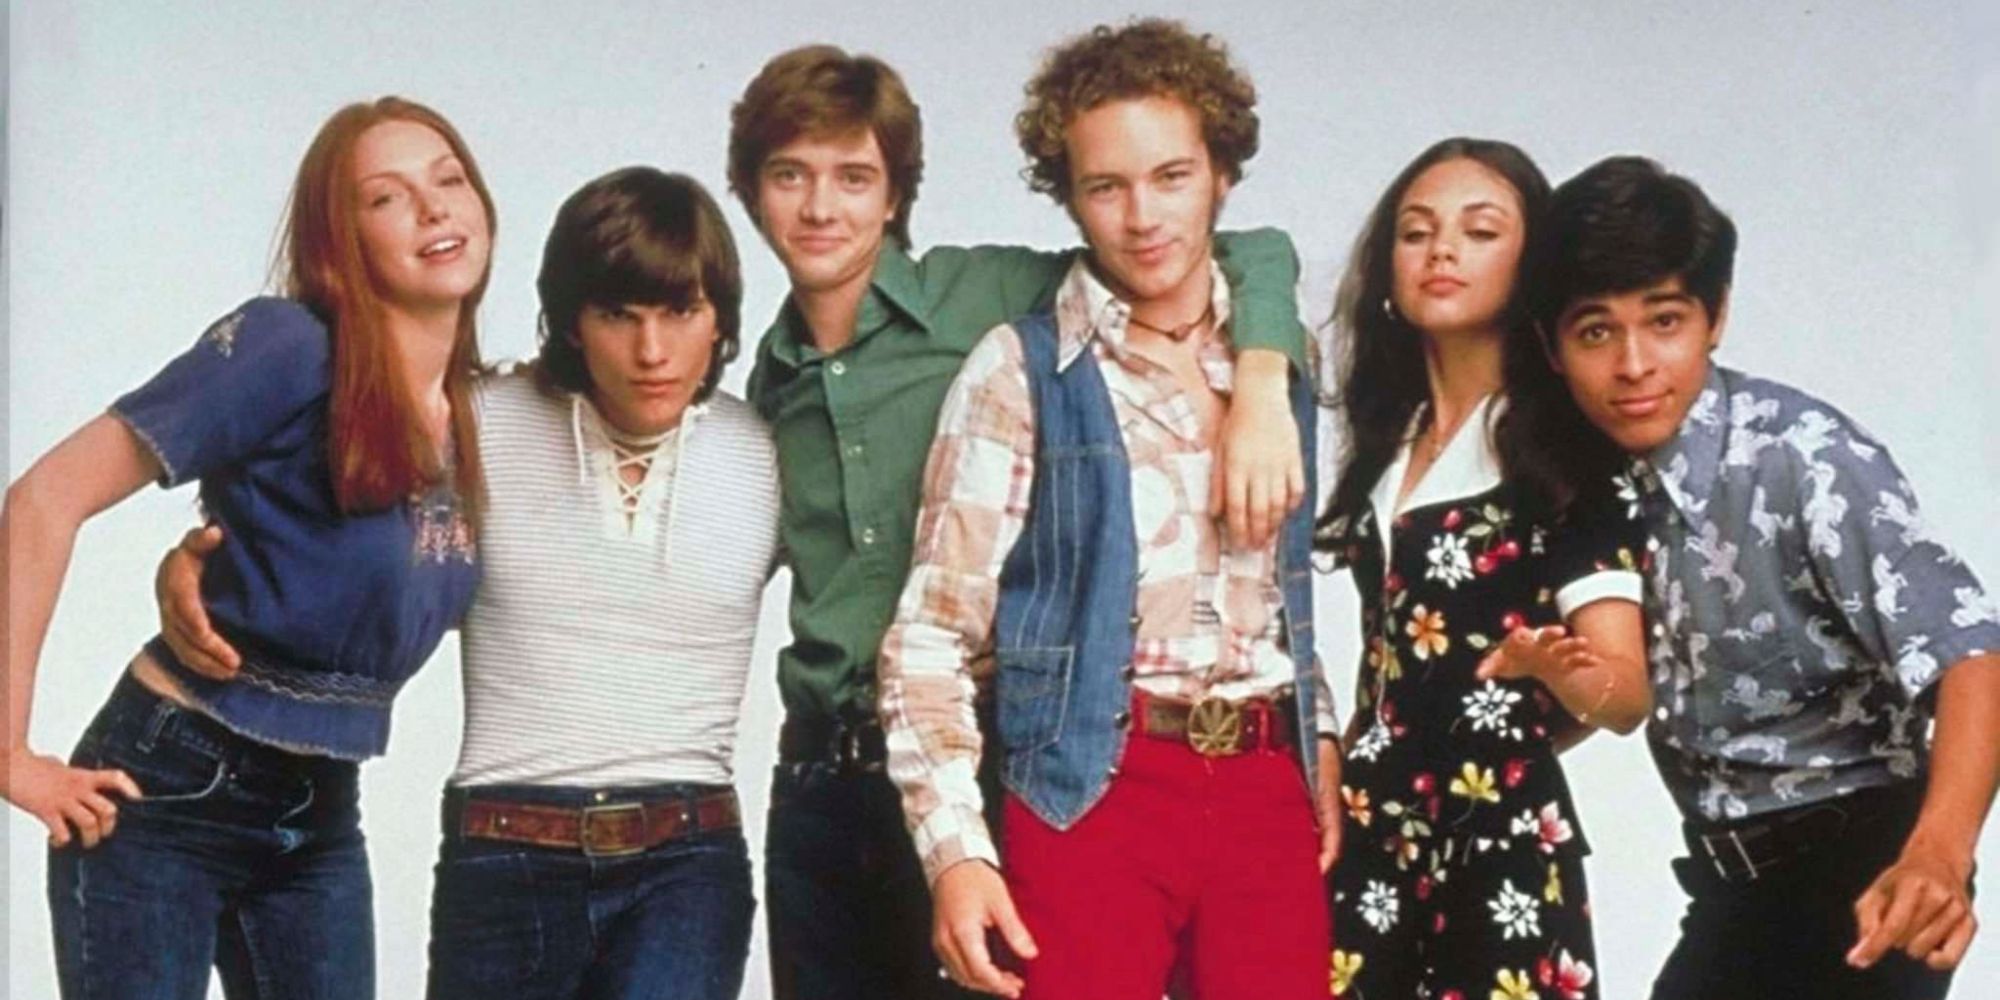 That '70s Show Timeline Is Very Confusing